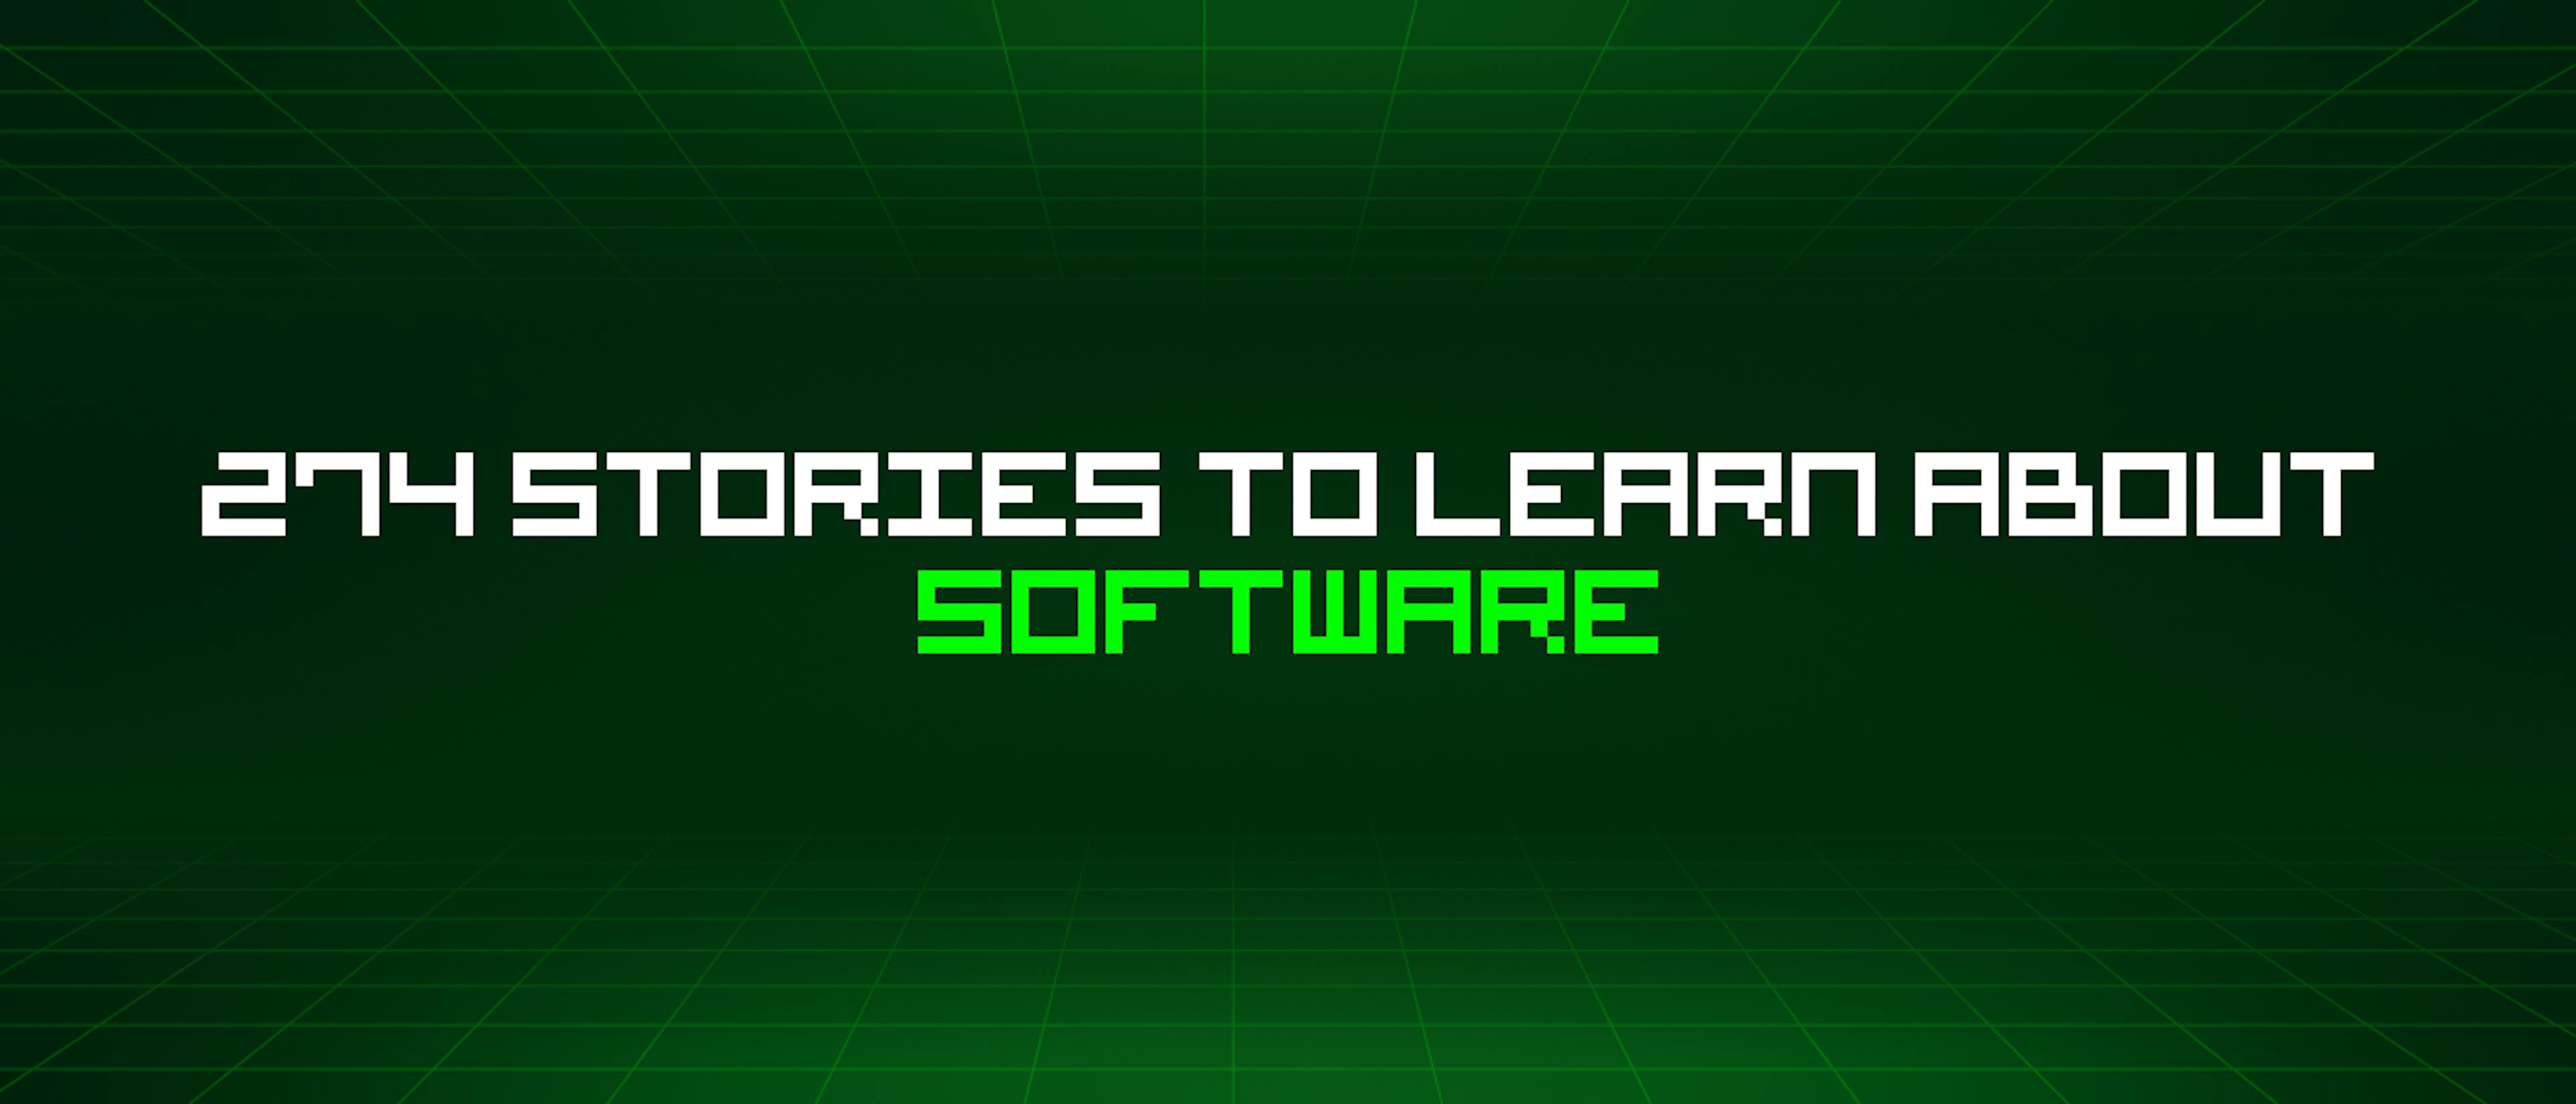 featured image - 274 Stories To Learn About Software